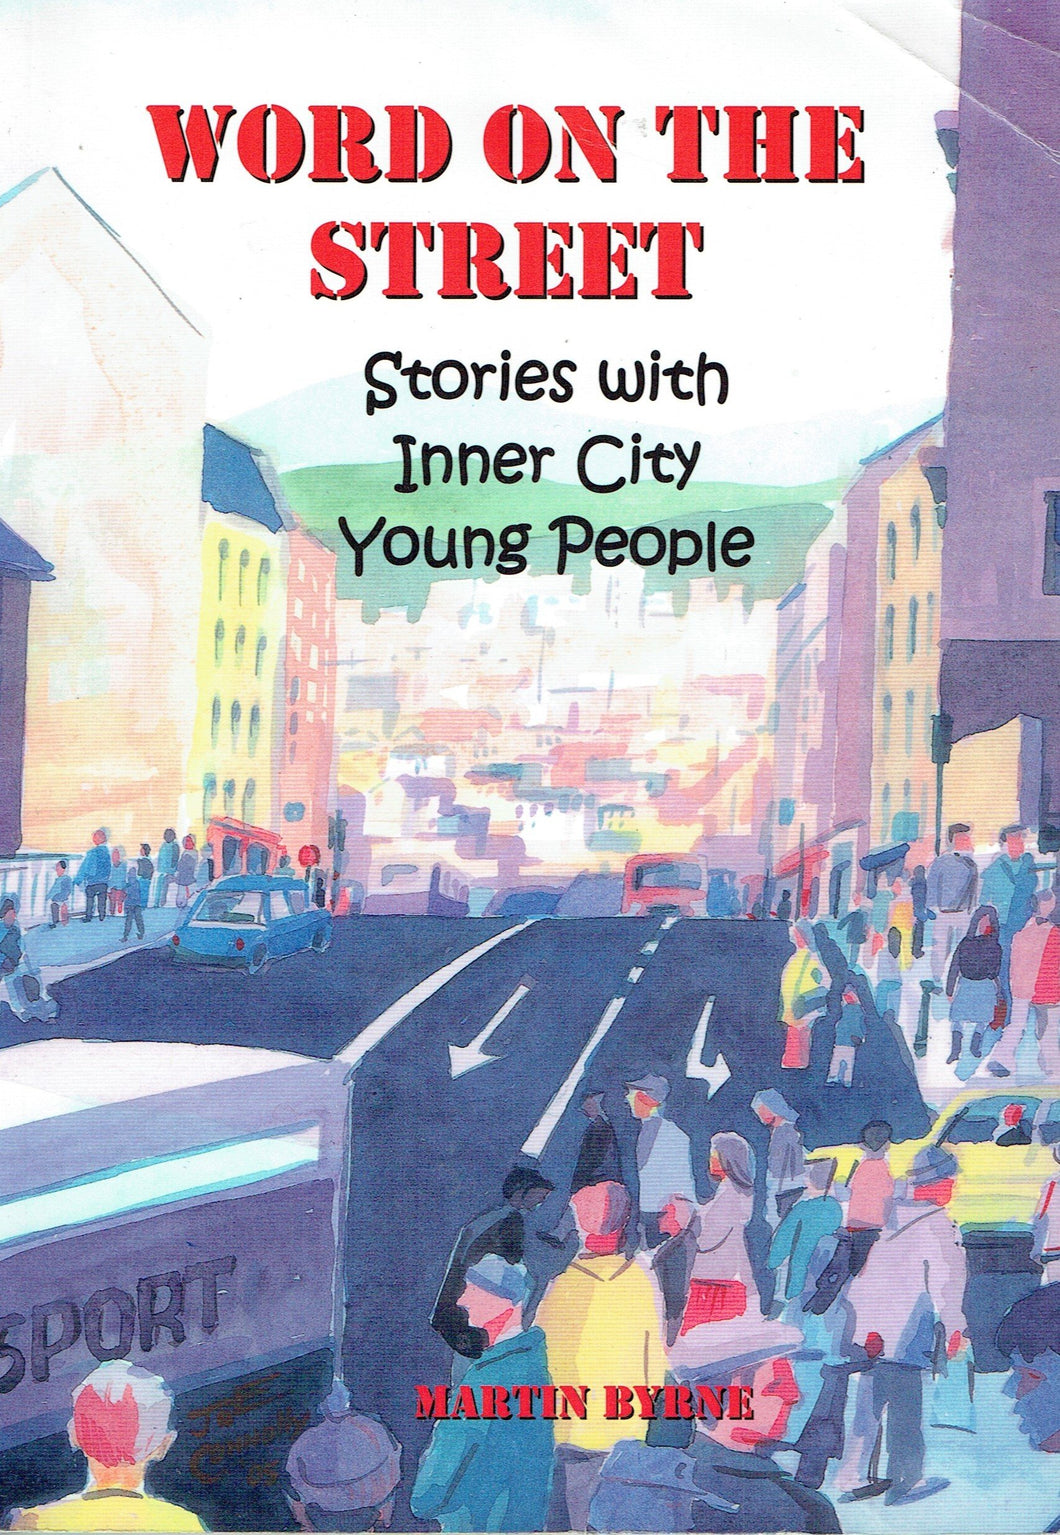 Word on the Street: Stories with Inner City Young People